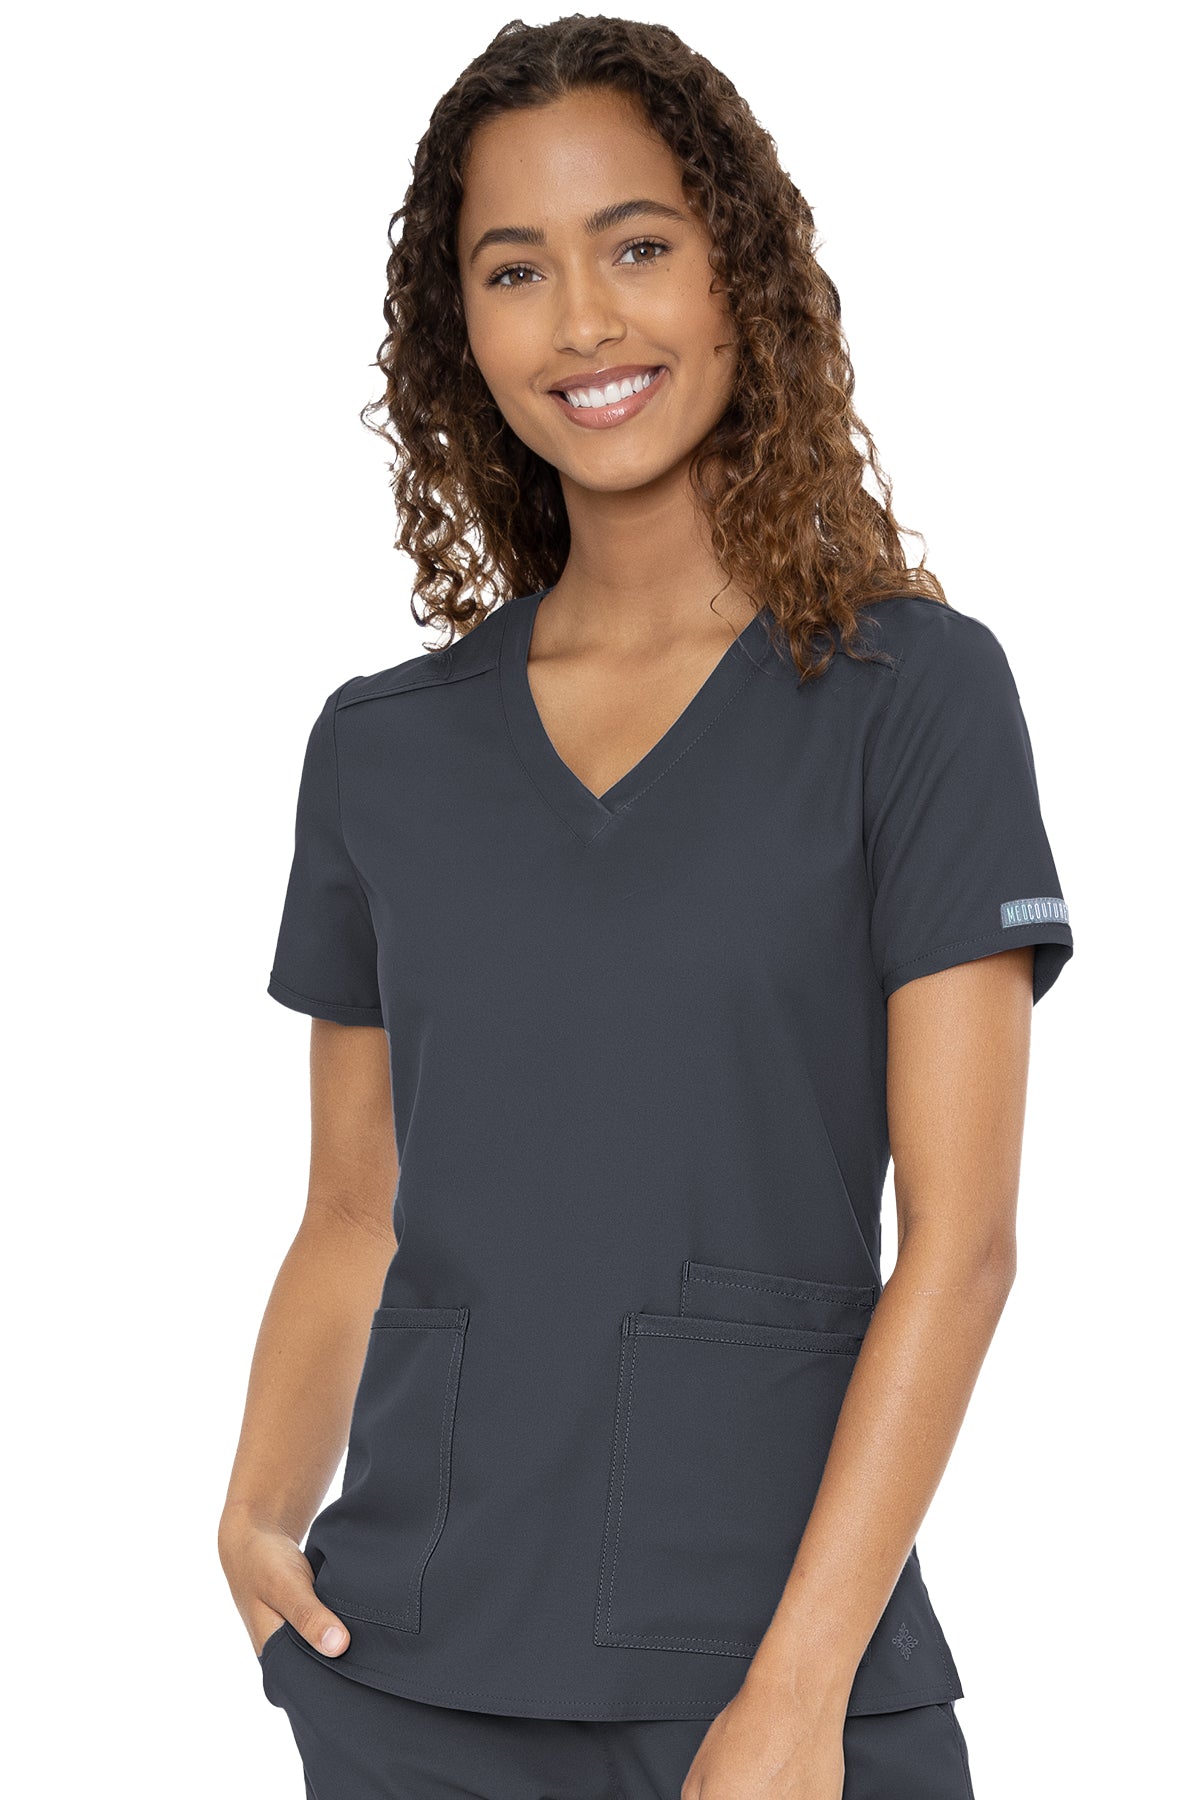 Med Couture Scrub Top Insight Classic V-Neck 3 Pocket in Pewter at Parker's Clothing and Shoes.